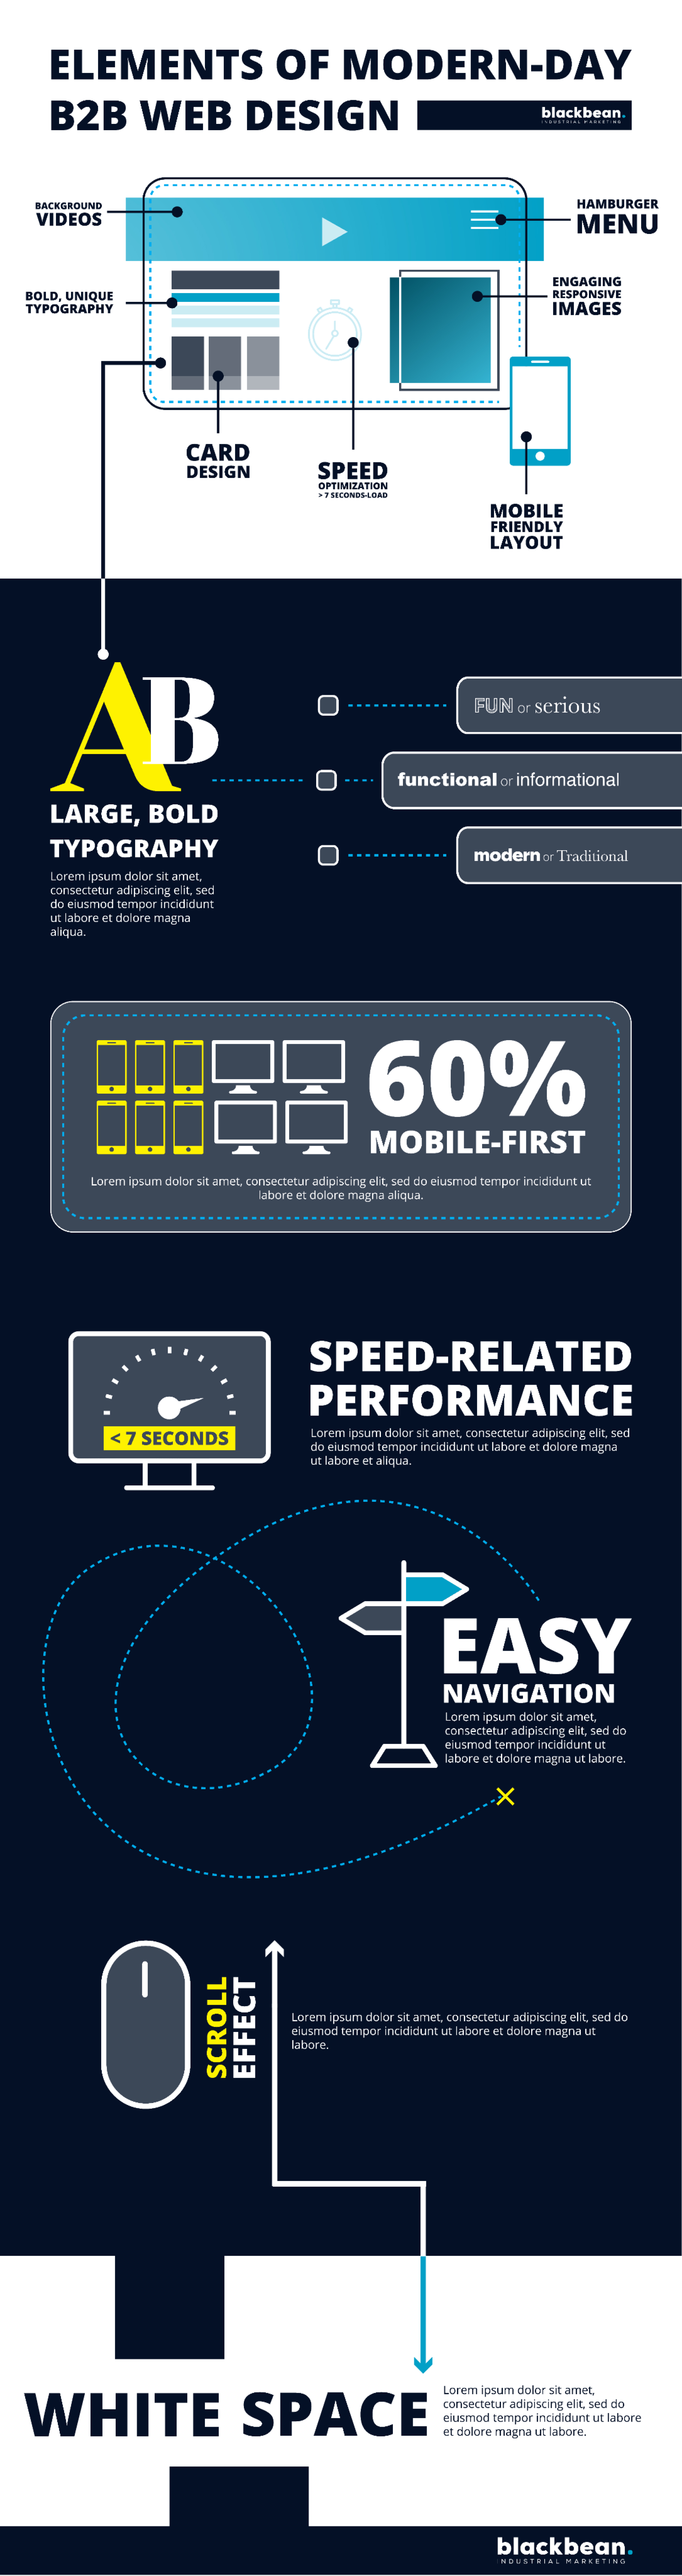 Elements of Modern Day B2B Web Design Infographic